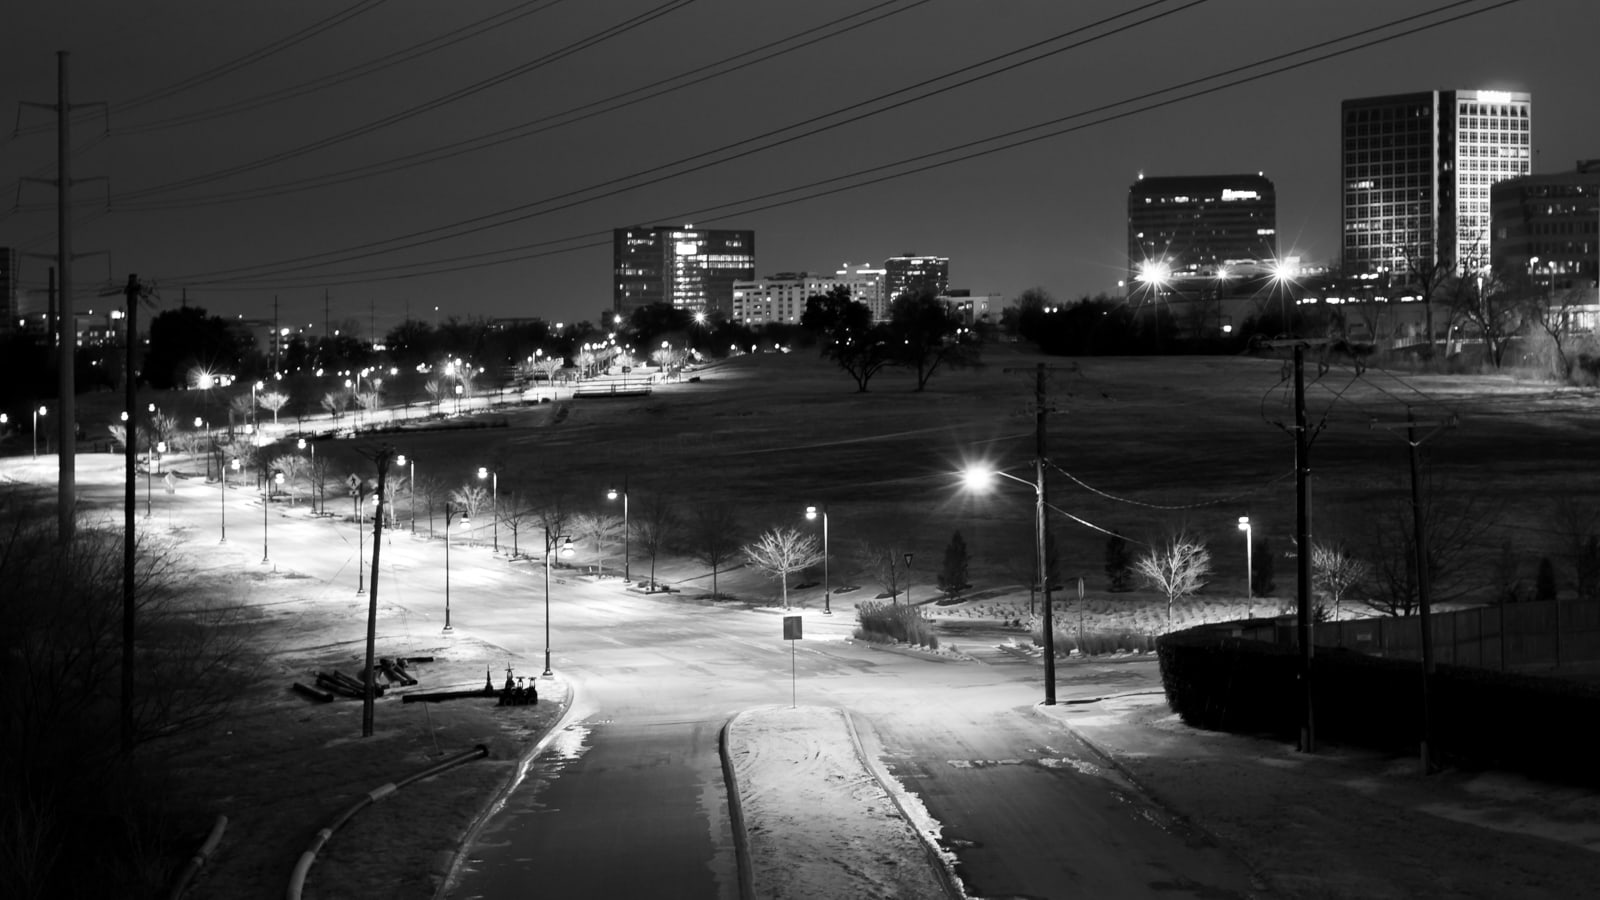 I Like The Night, From the Royal Lane bridge overlooking Manderville Lane in Dallas, Texas 